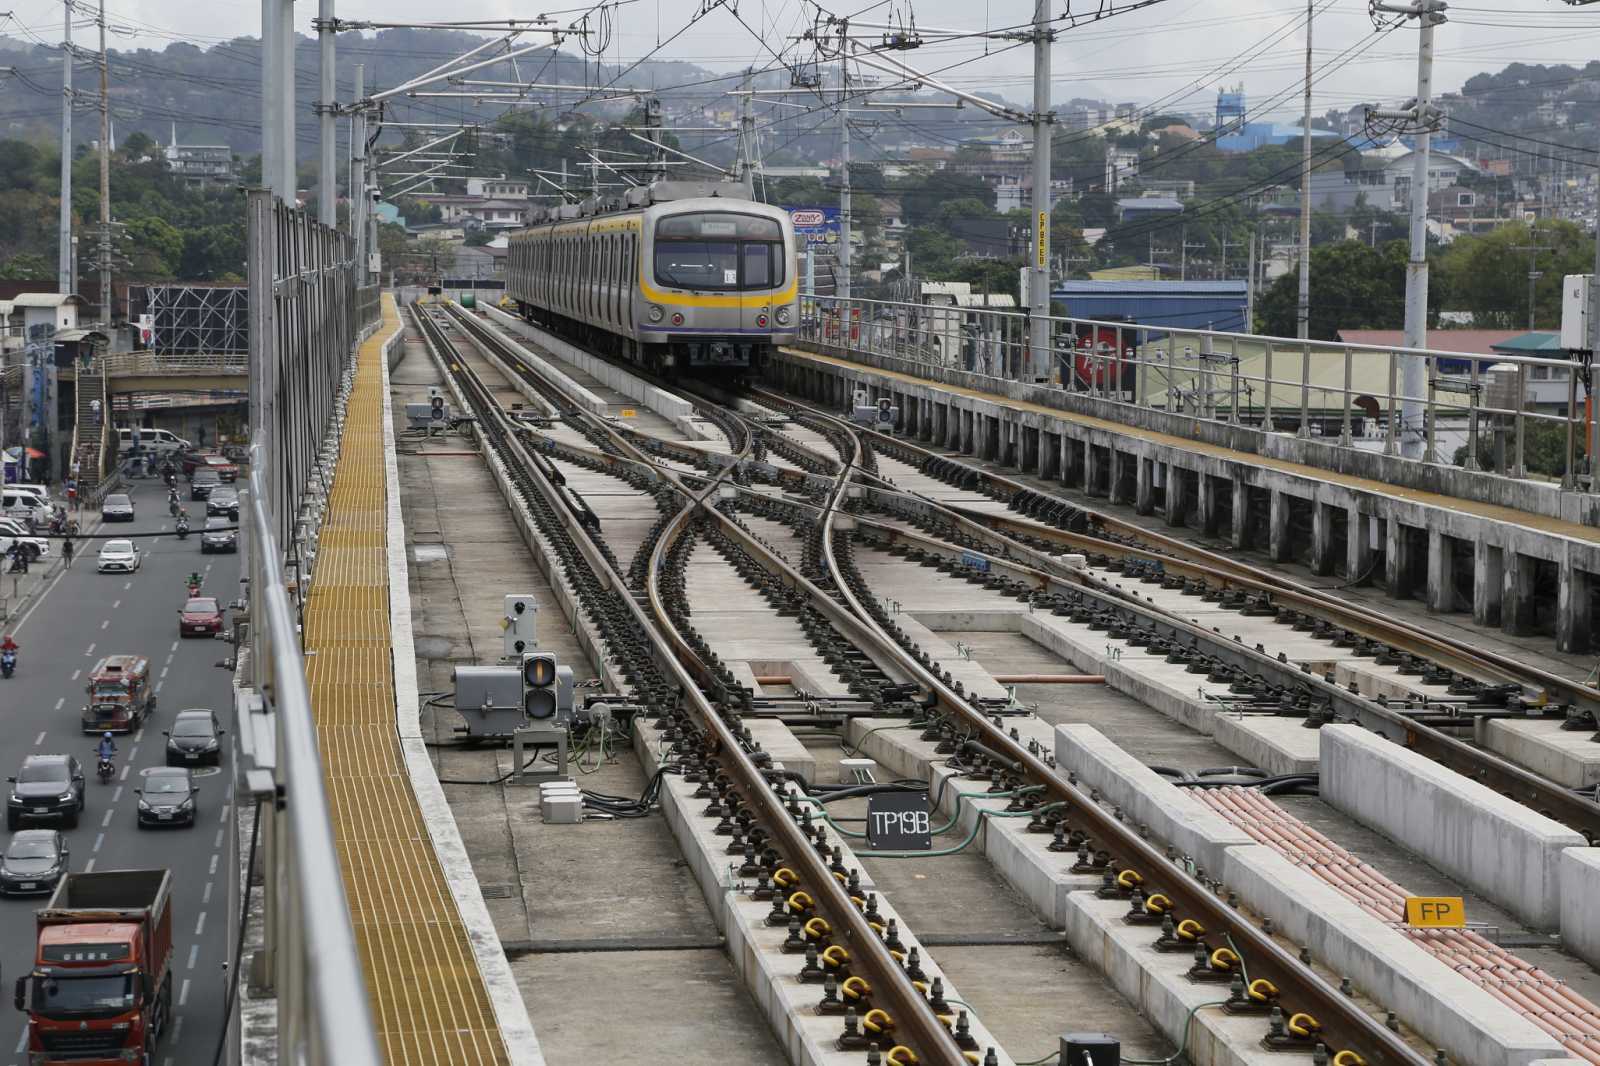 LRT-2 resumes operations after Recto fire